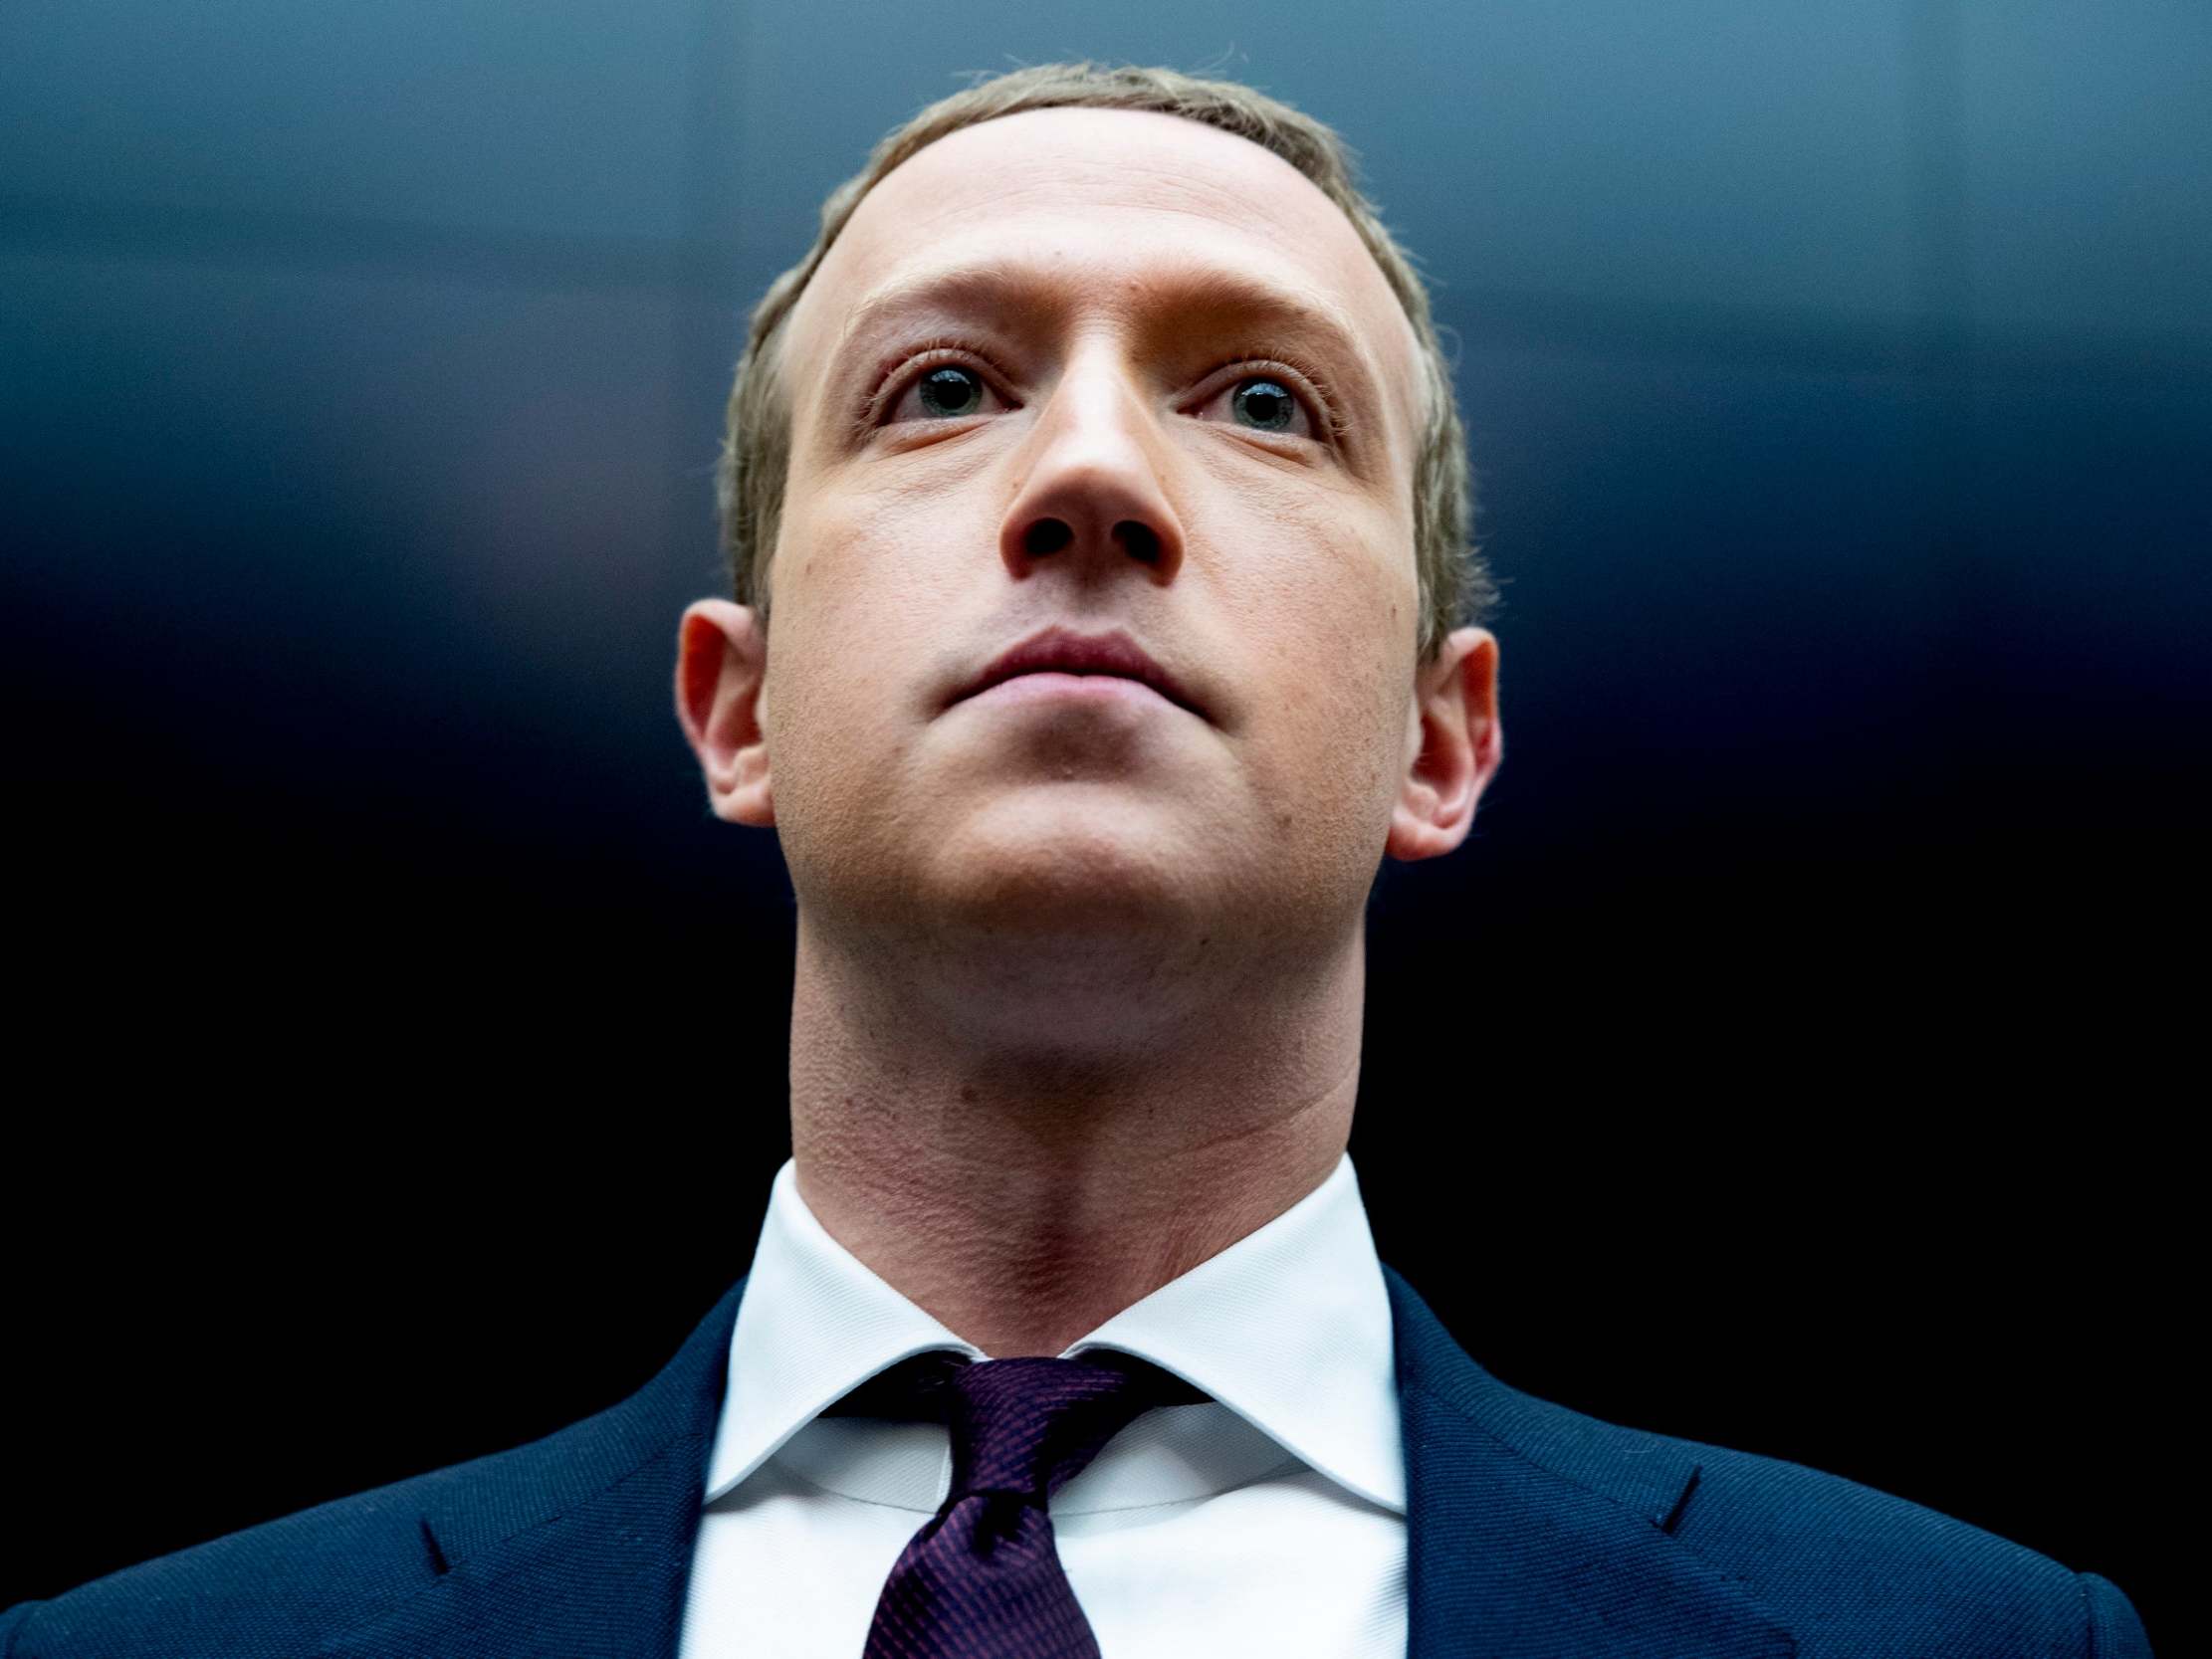 Mark Zuckerberg has a chance, before a vital US election and in the midst of nationwide protests and a global pandemic, to stem the spread of lies, misinformation and hatred that have characterised the social media era